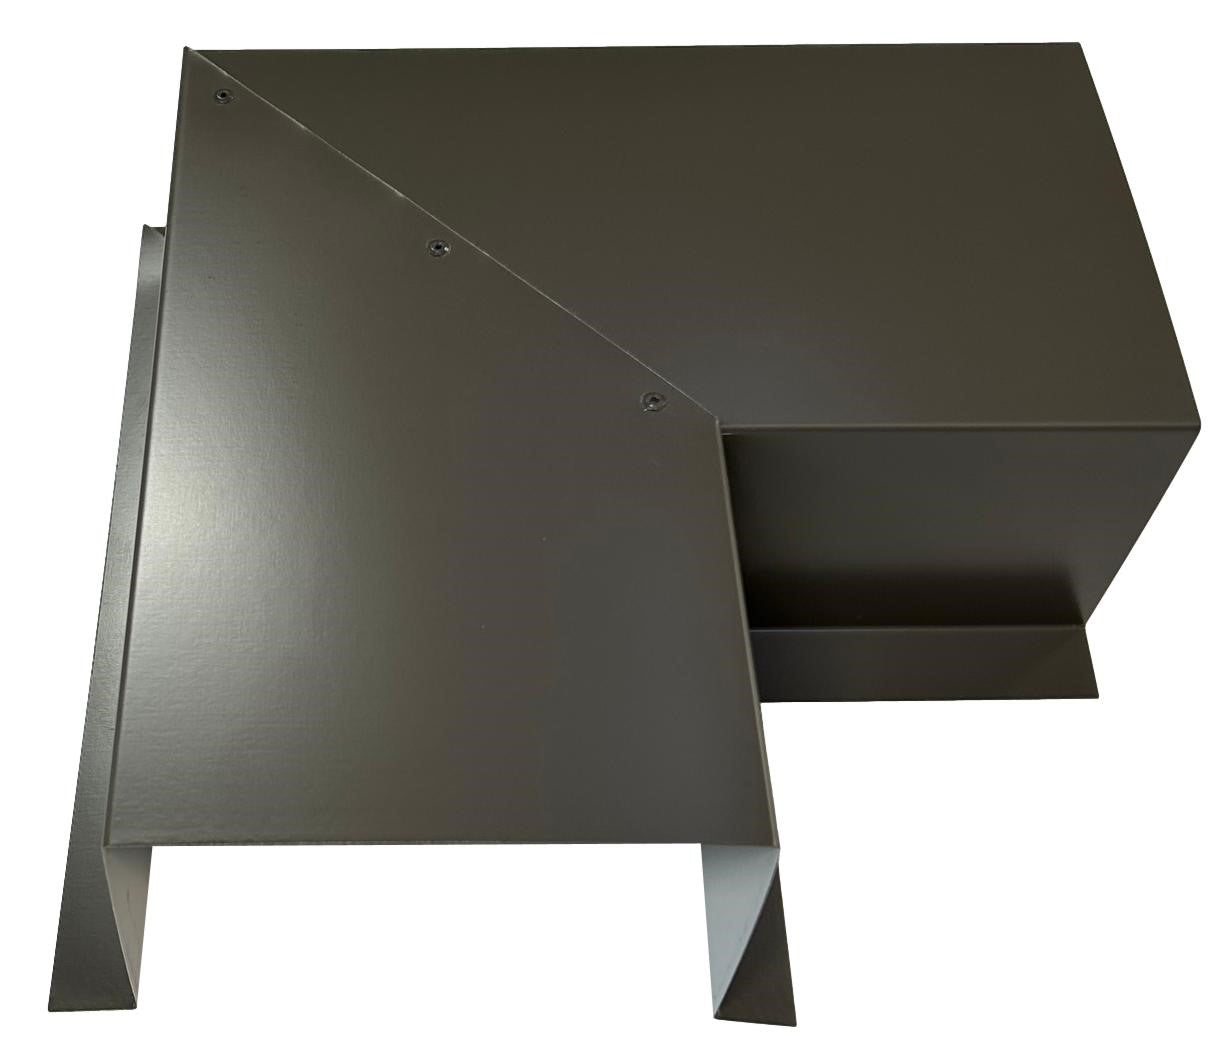 A matte-finished, gray metal sheet shaped into a complex geometric form with angled bends and three visible screws securing a folded section. The Perma Cover Residential Series - Line Set Cover Side Turning Elbows - Premium Quality, ideal for HVAC line sets, is positioned against a white background, displaying its angular design and edges.